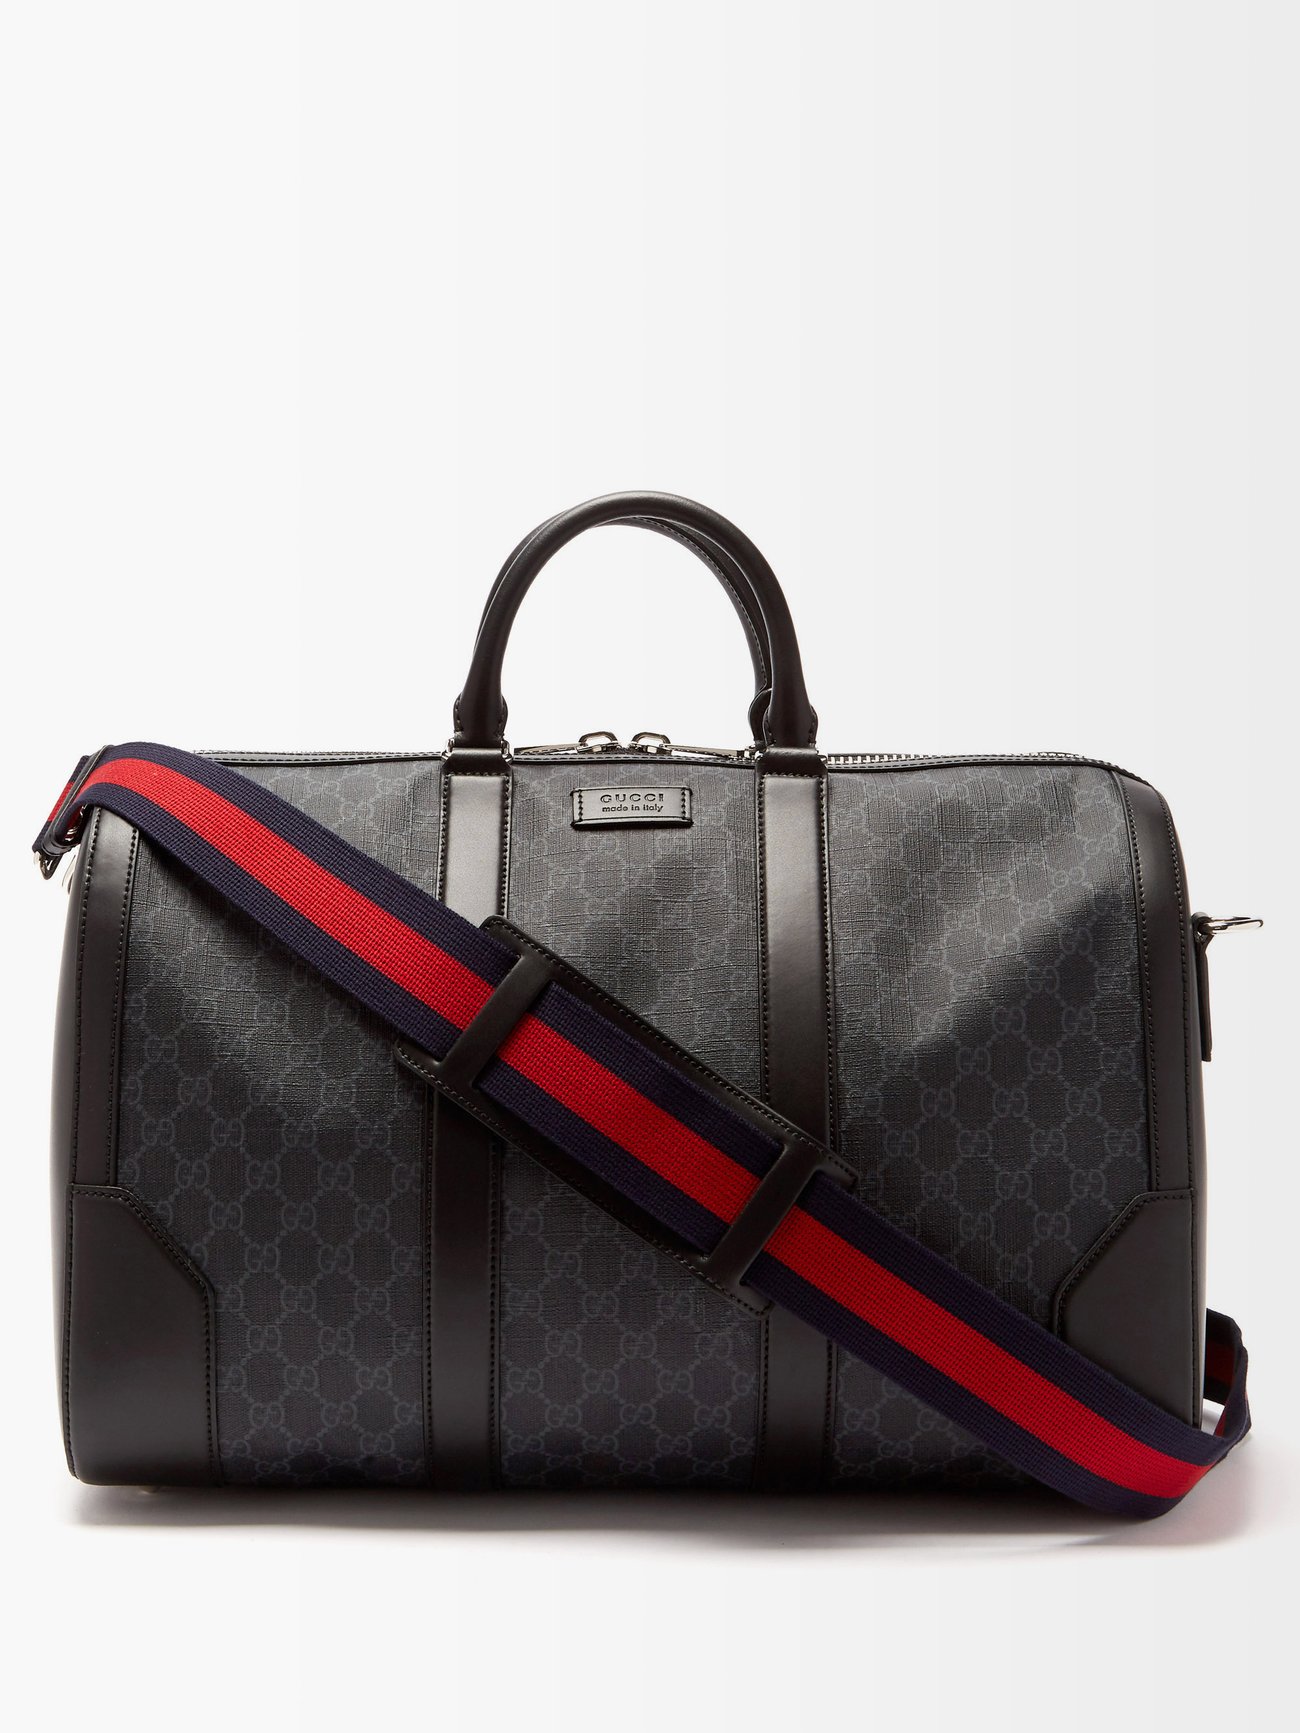 Gucci Men's Jumbo GG Leather Travel Bag - Black - Briefcases